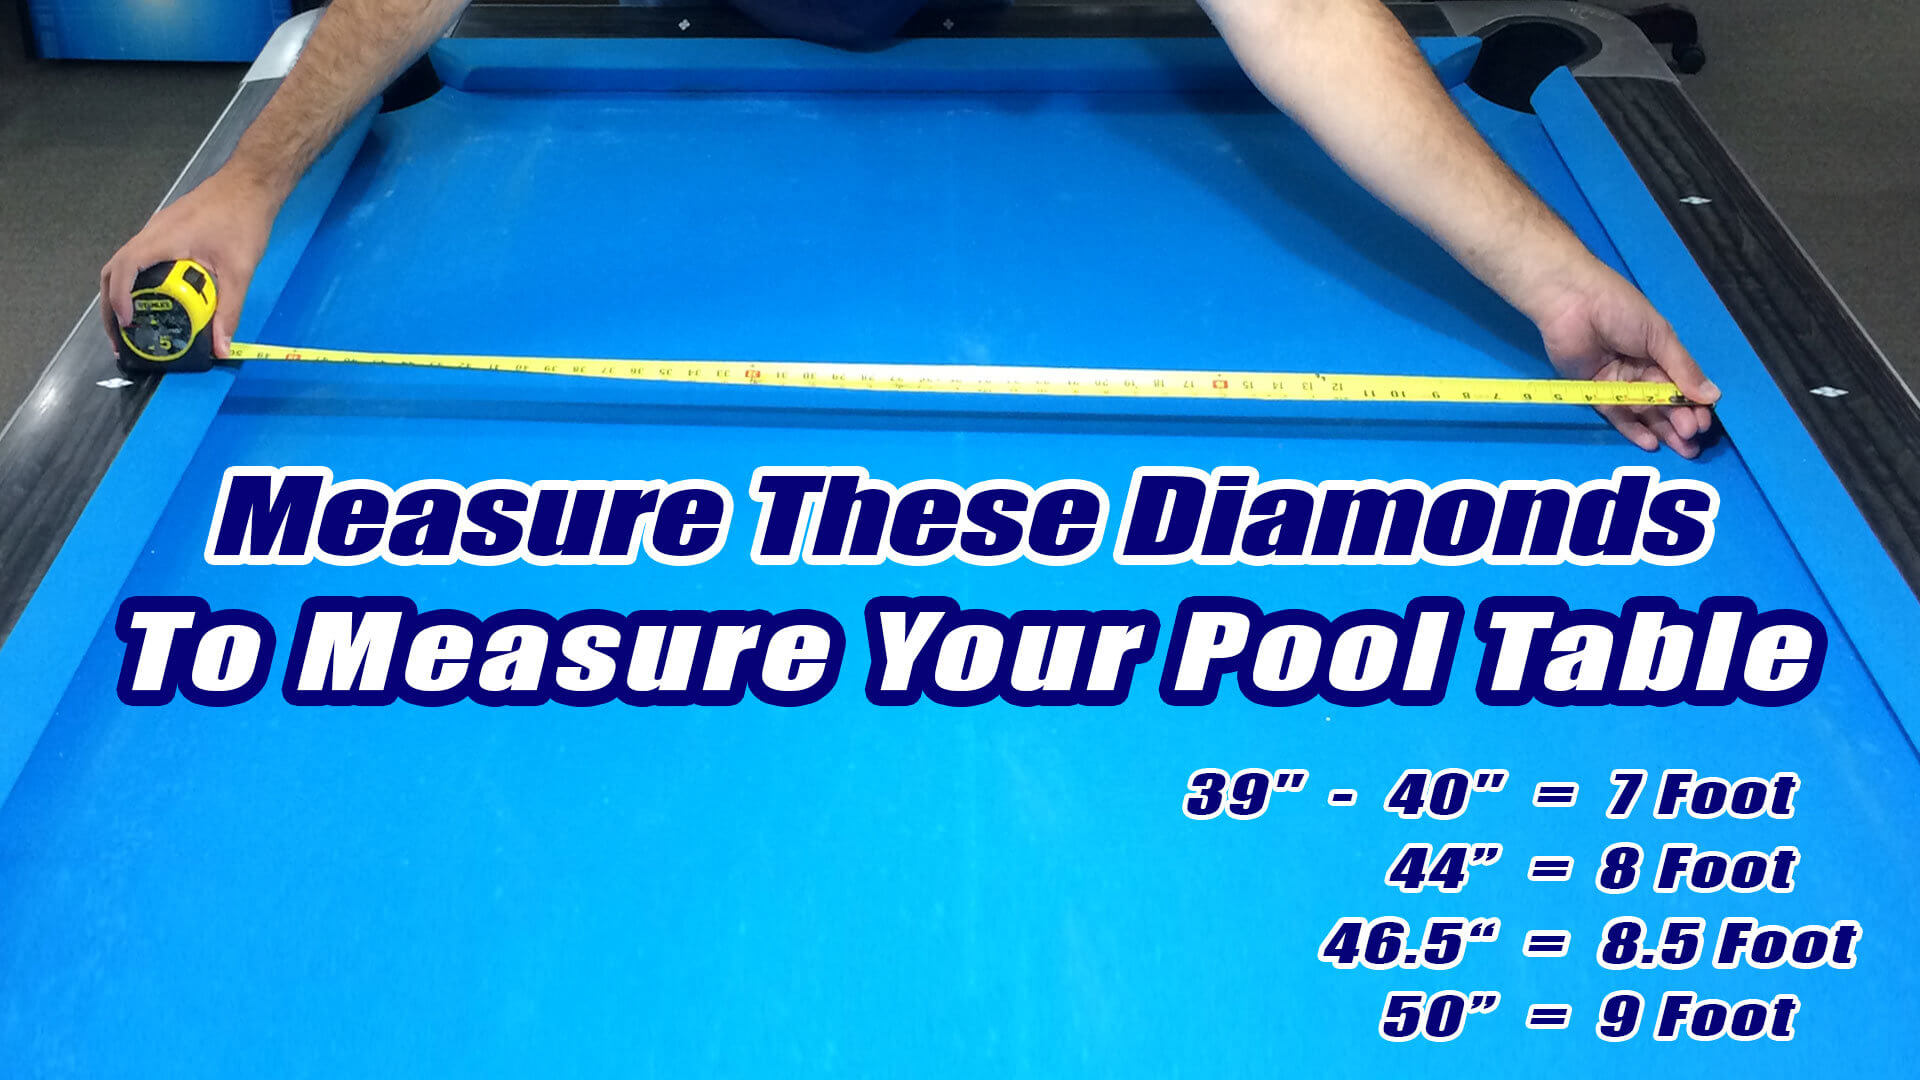 Measure These Diamonds To Measure Your Pool Table